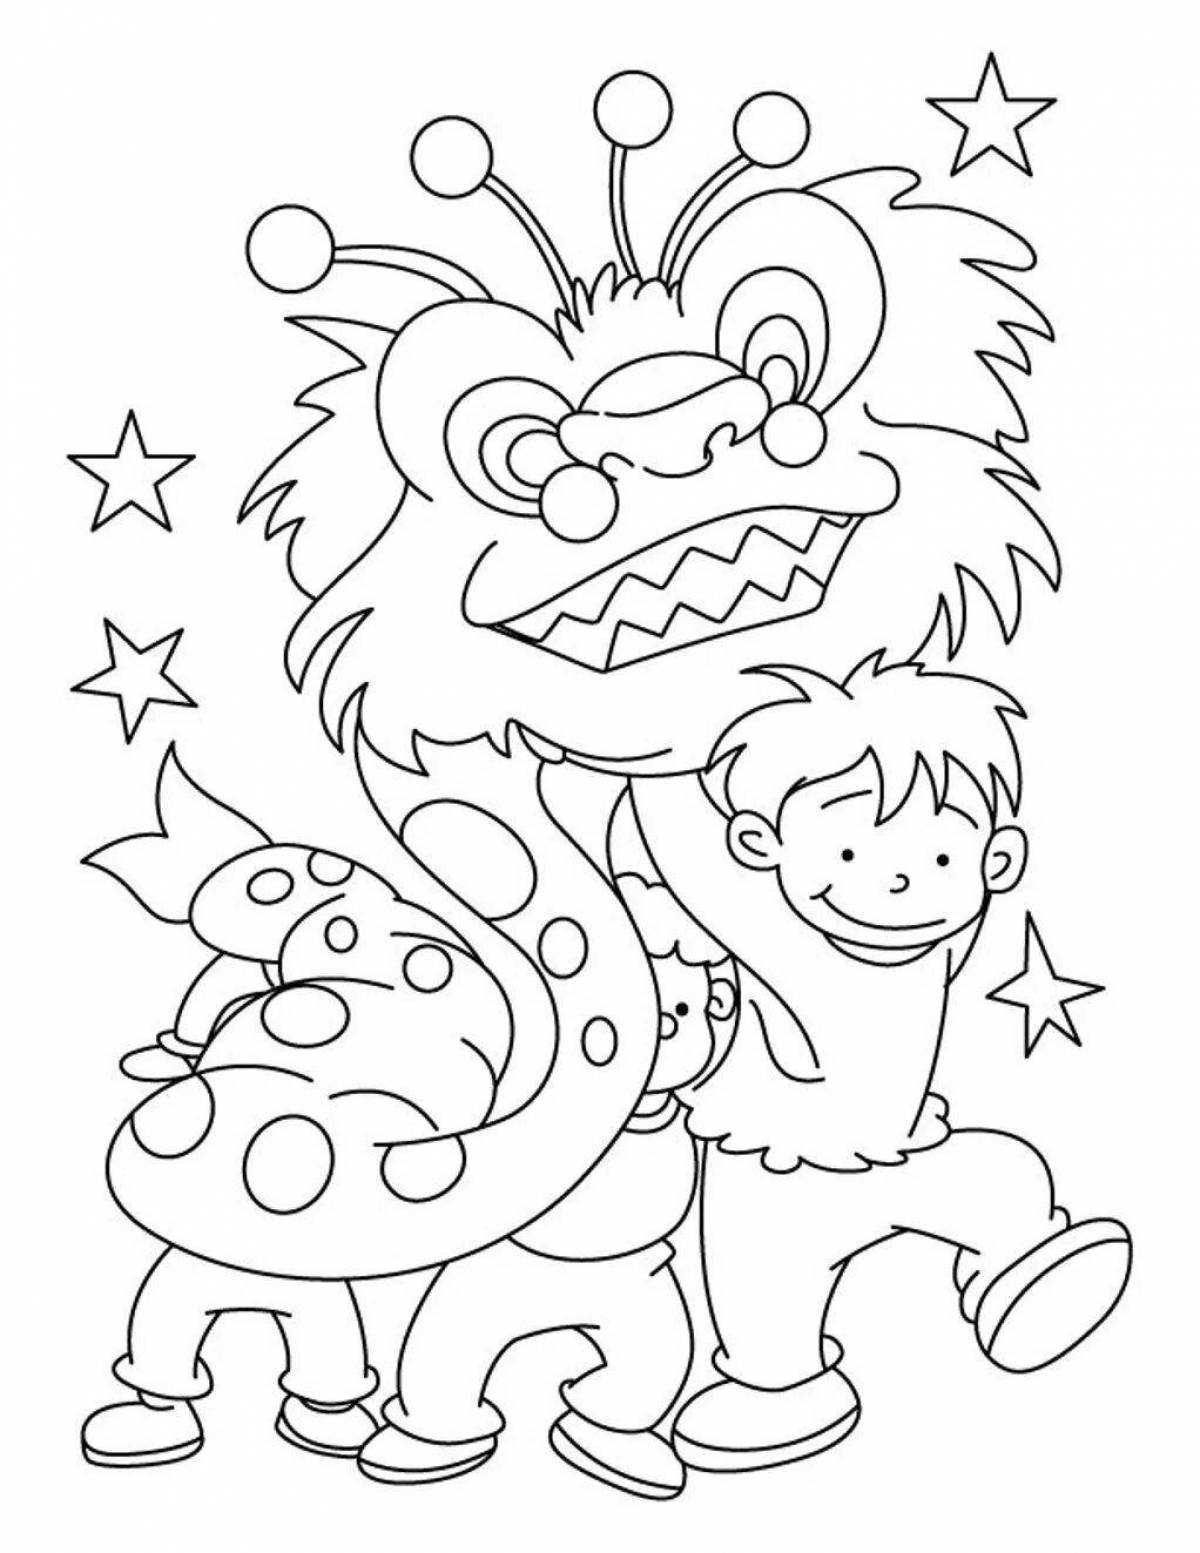 Playful chinese new year coloring book for kids